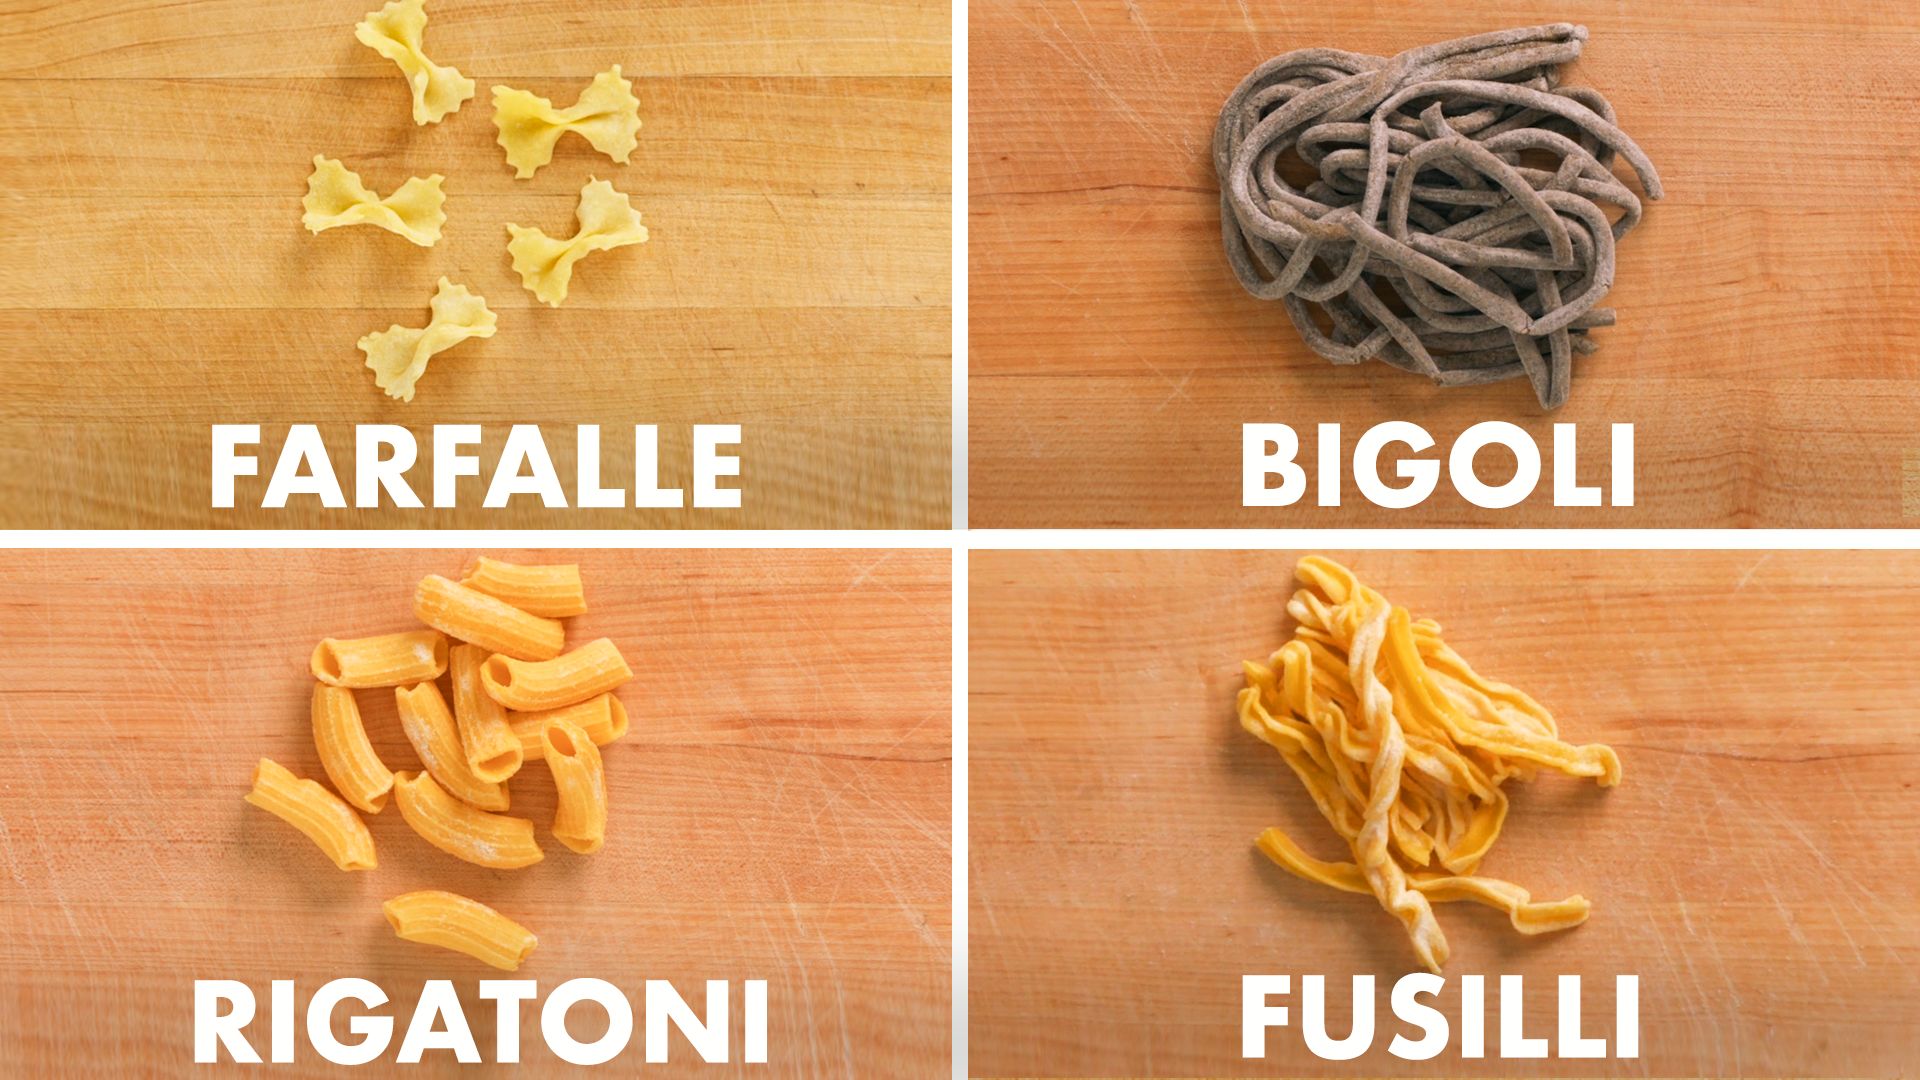 33 Types of pasta shapes with their uses and exciting recipes